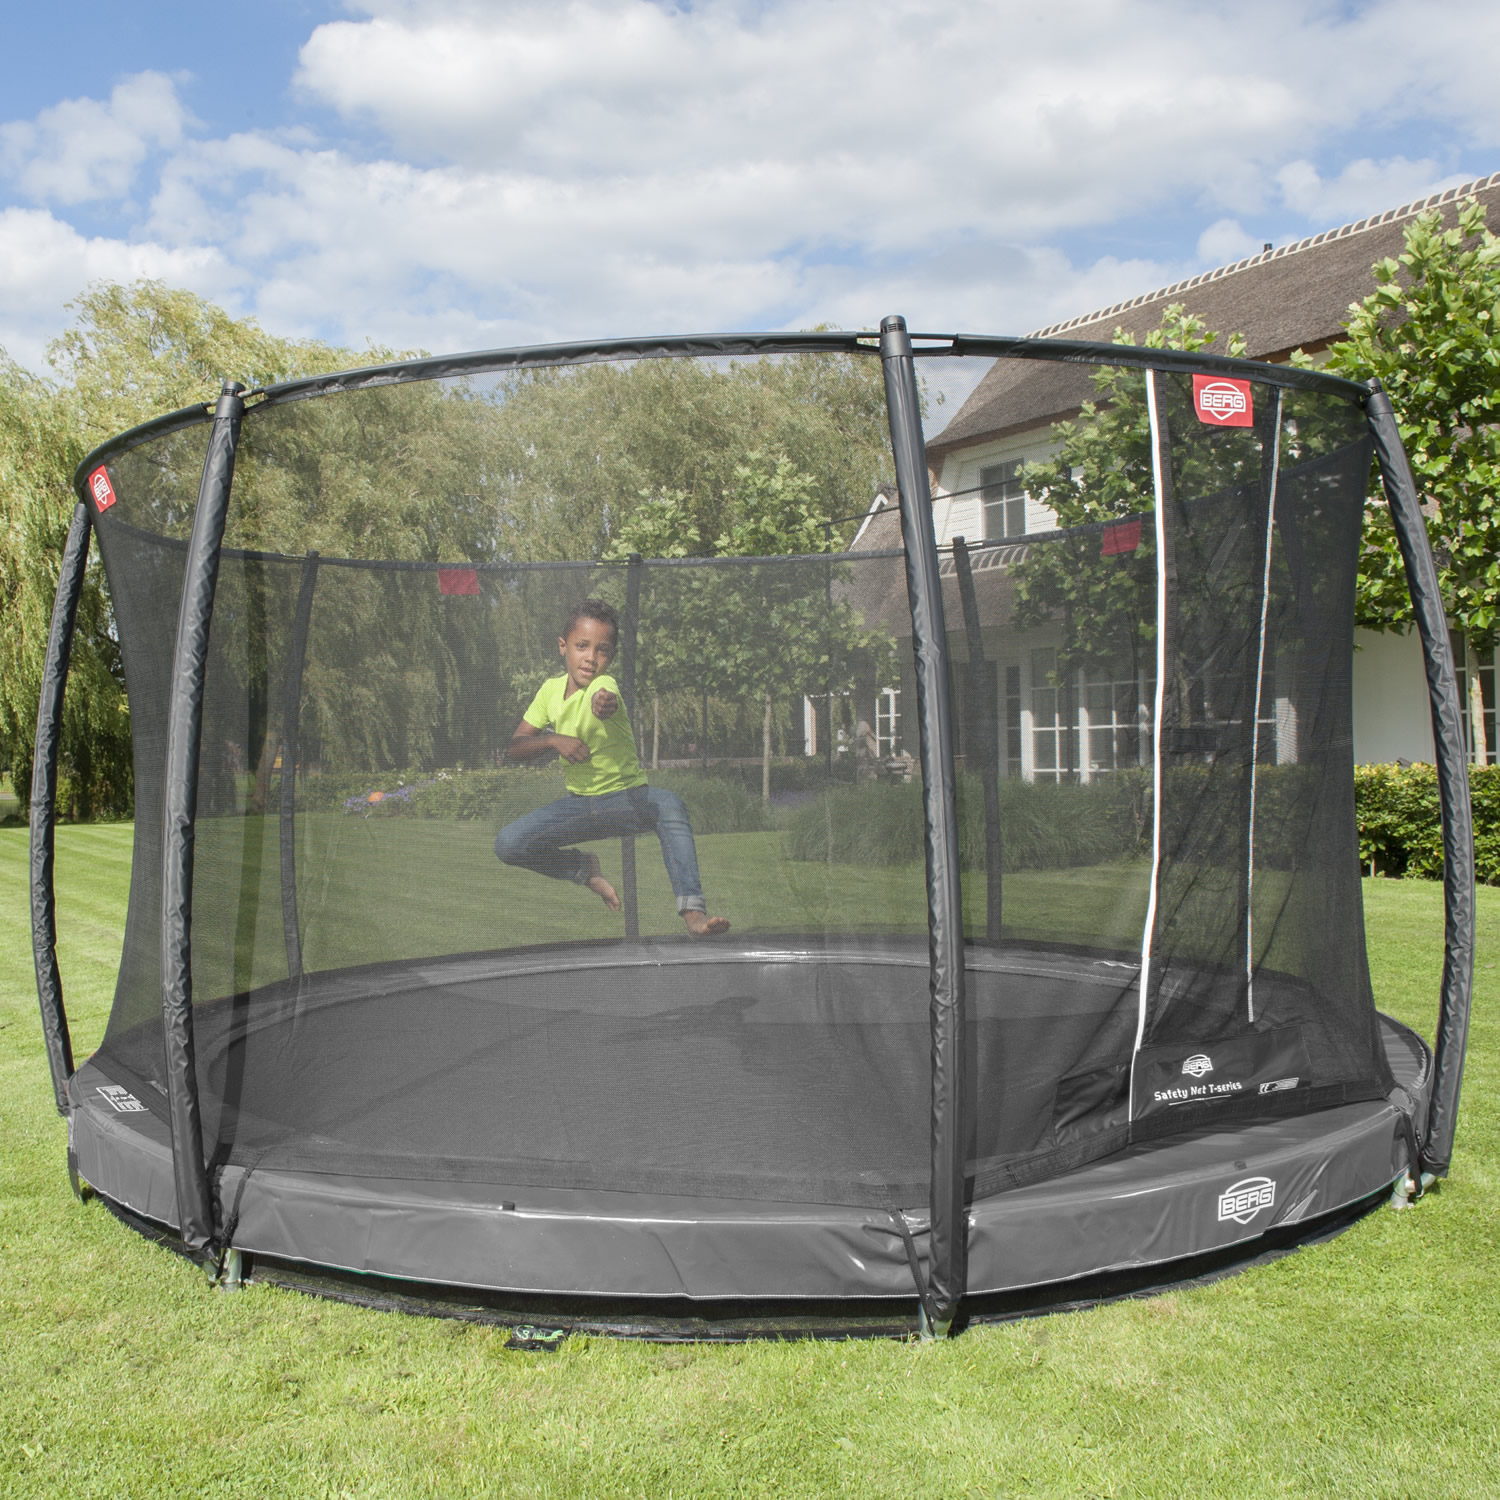 Gematigd Zwitsers Behoefte aan Berg Elite InGround 430 Grey incl. Safety Net Deluxe - Best quality,  biggest choice